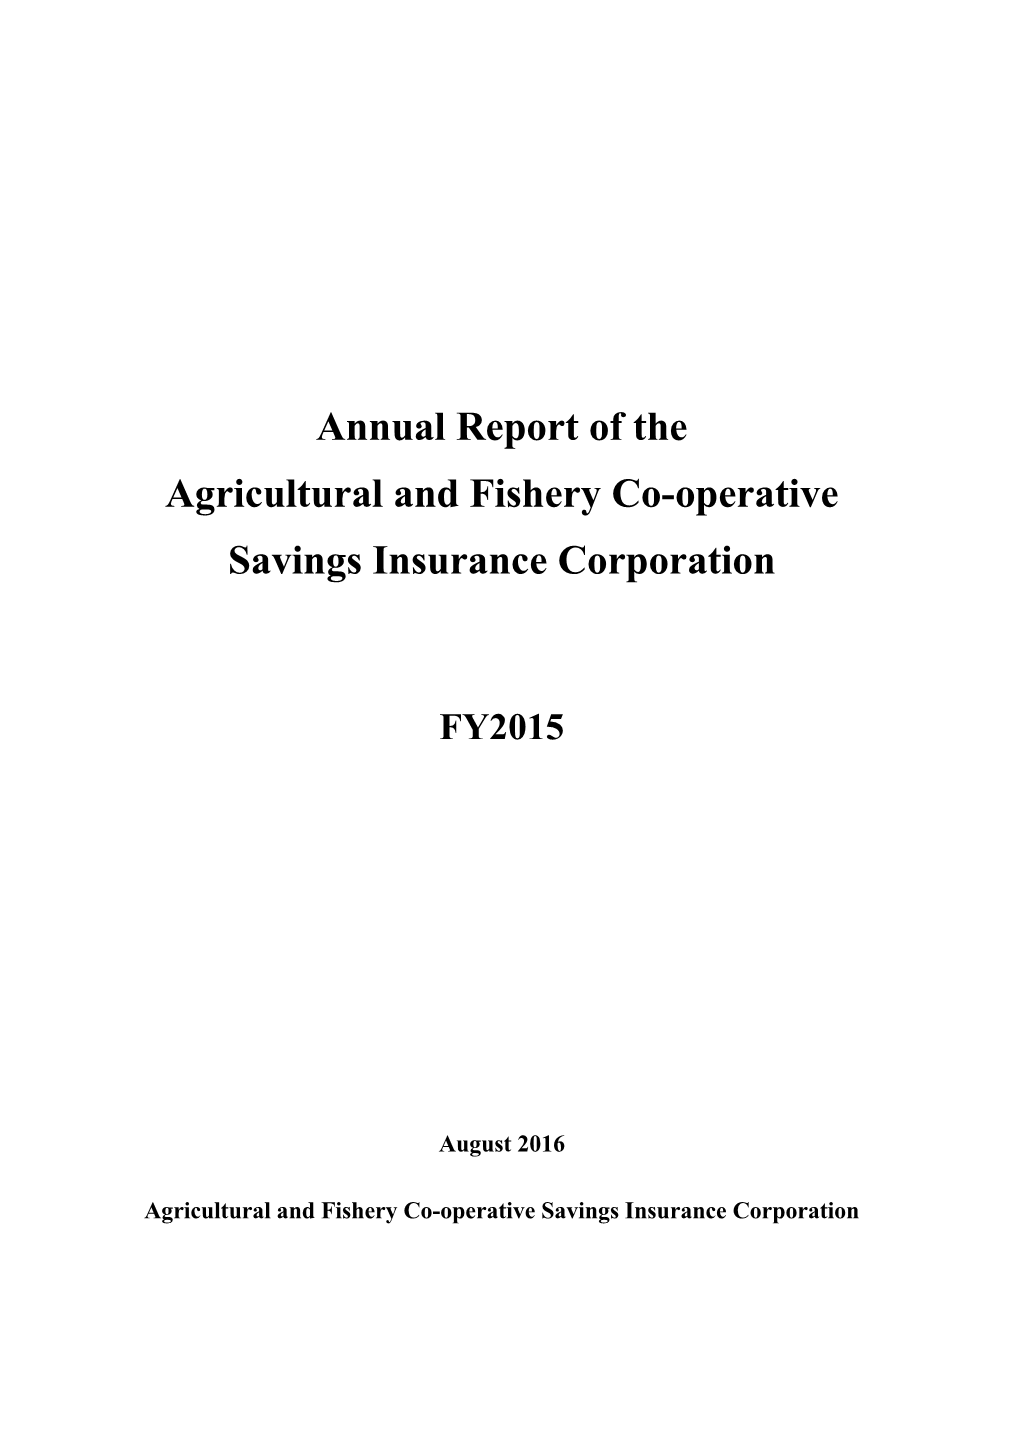 Annual Report of the Agricultural and Fishery Co-Operative Savings Insurance Corporation